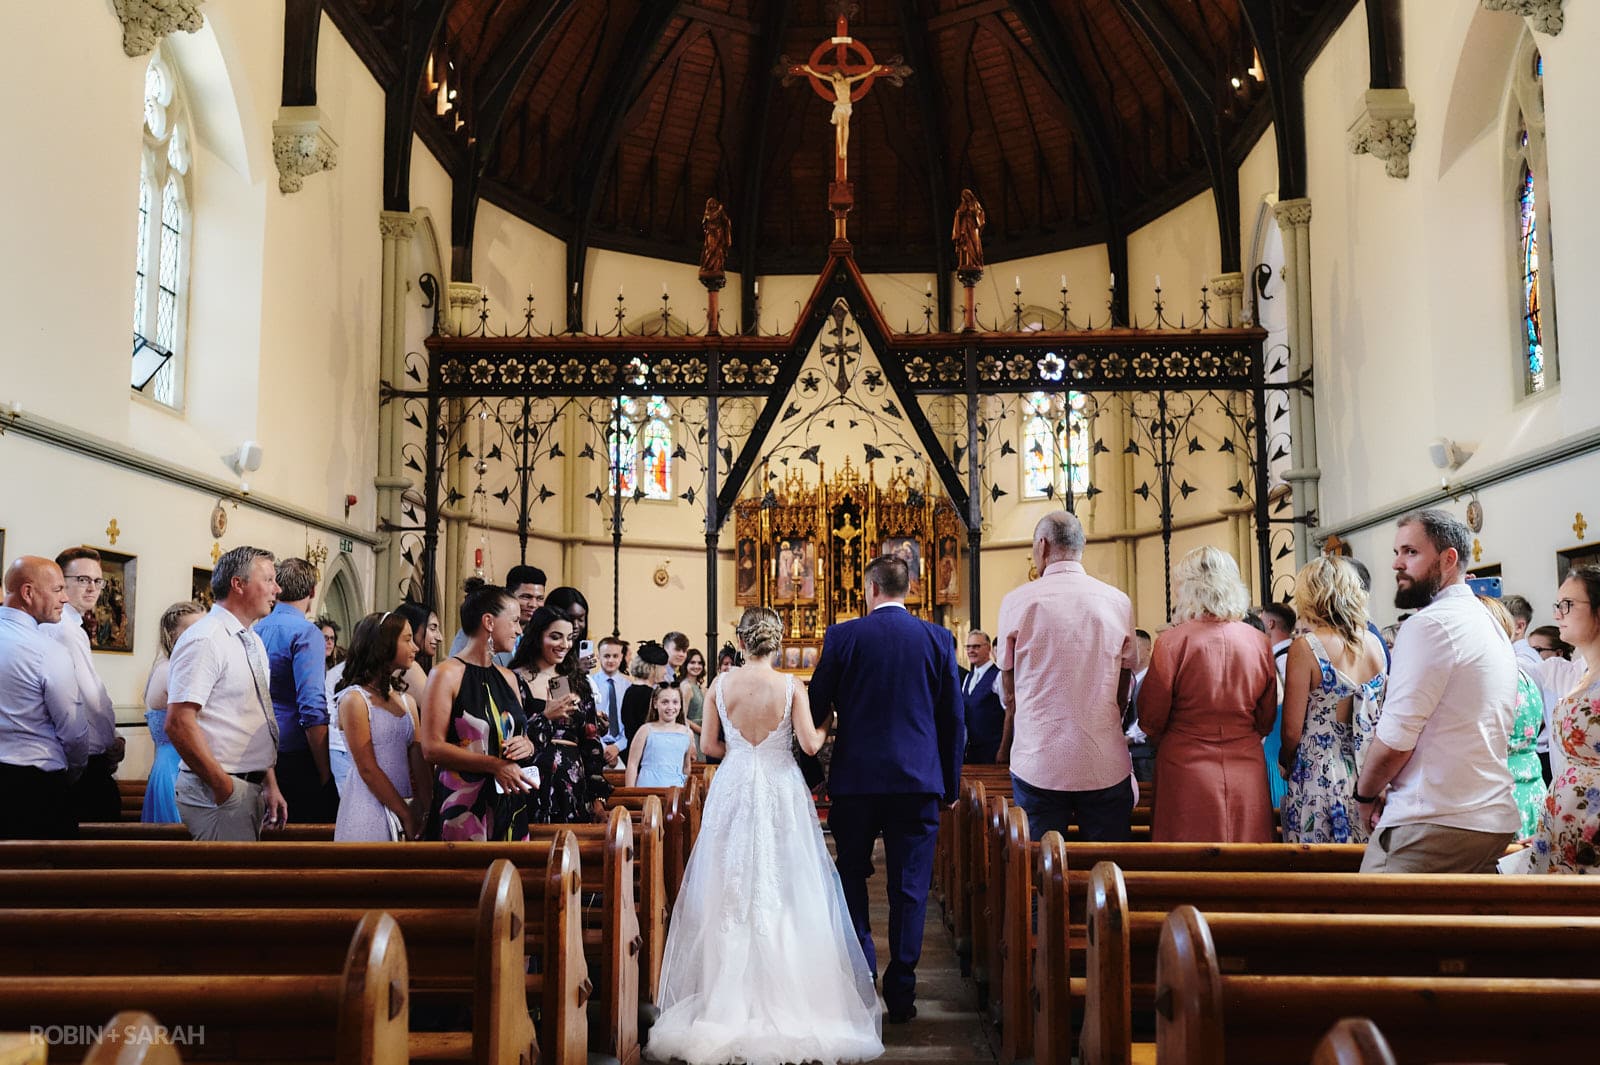 Bride and father walk up aisle at St Peter's church Bromsgrove as guests watch